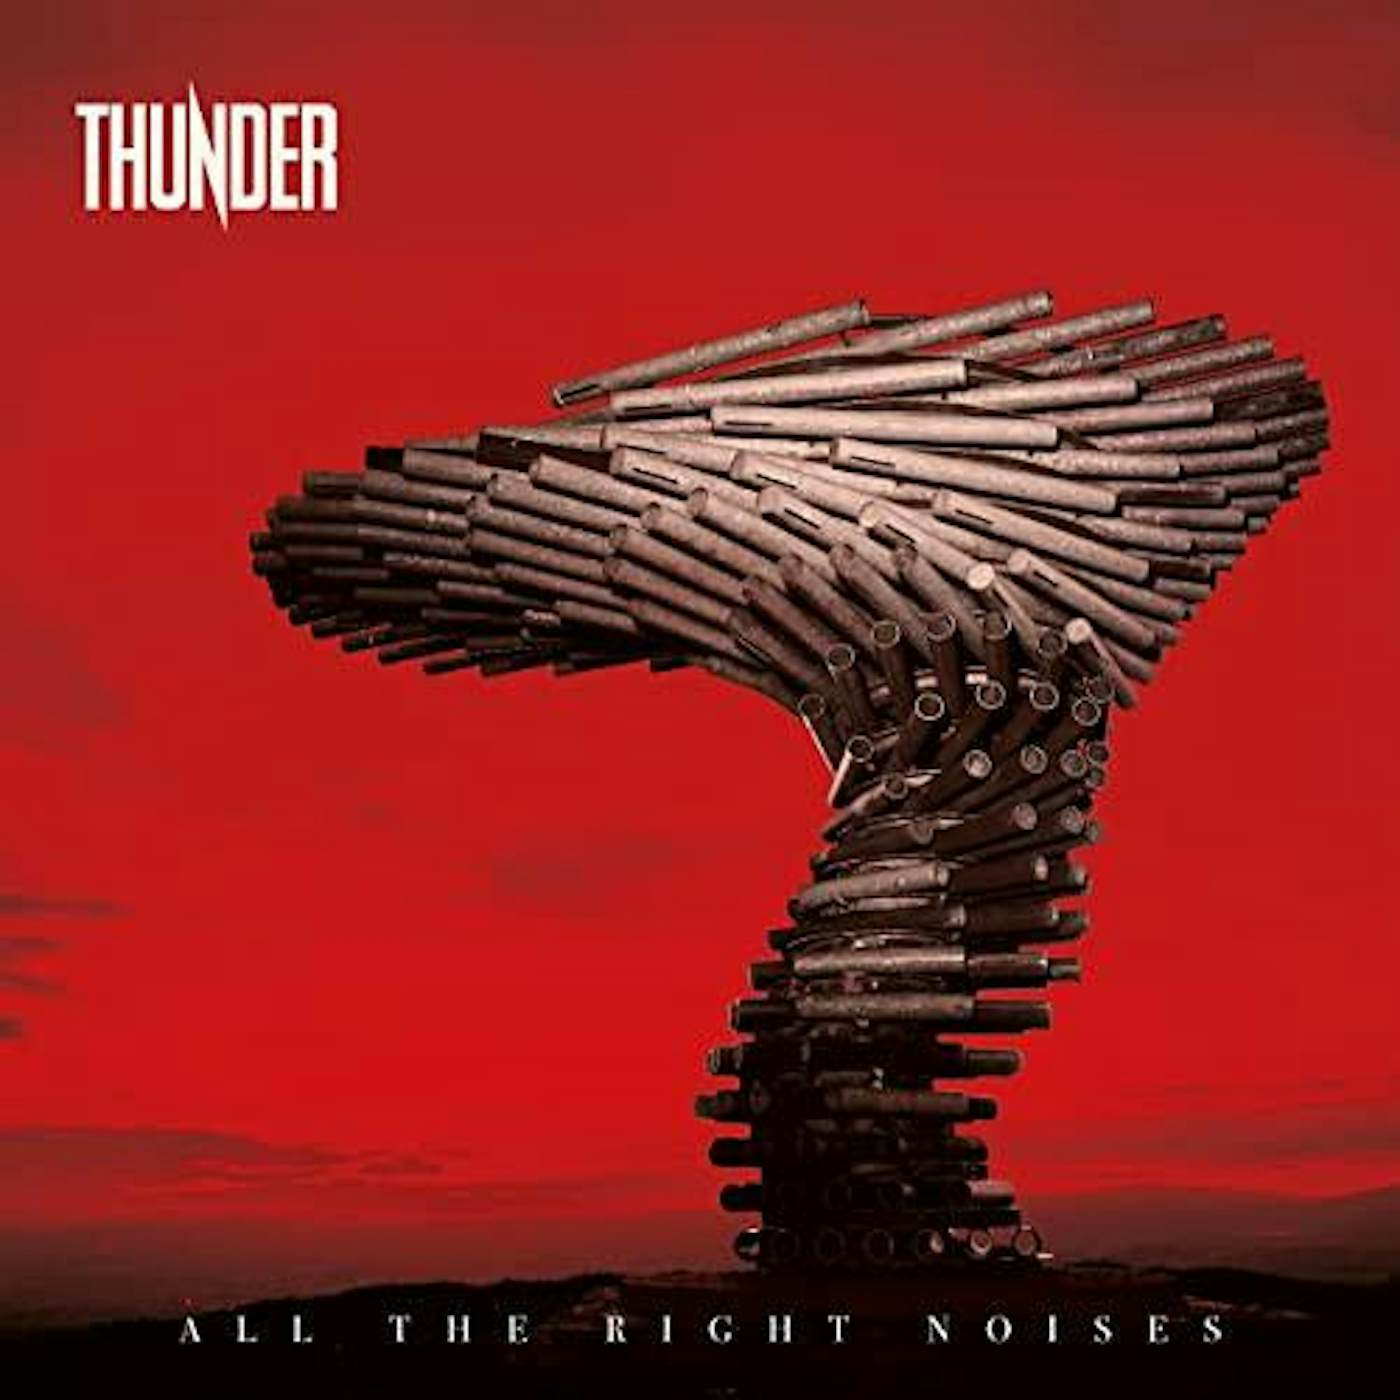 Thunder ALL THE RIGHT NOISES (DELUXE EDITION/2CD/DVD) CD